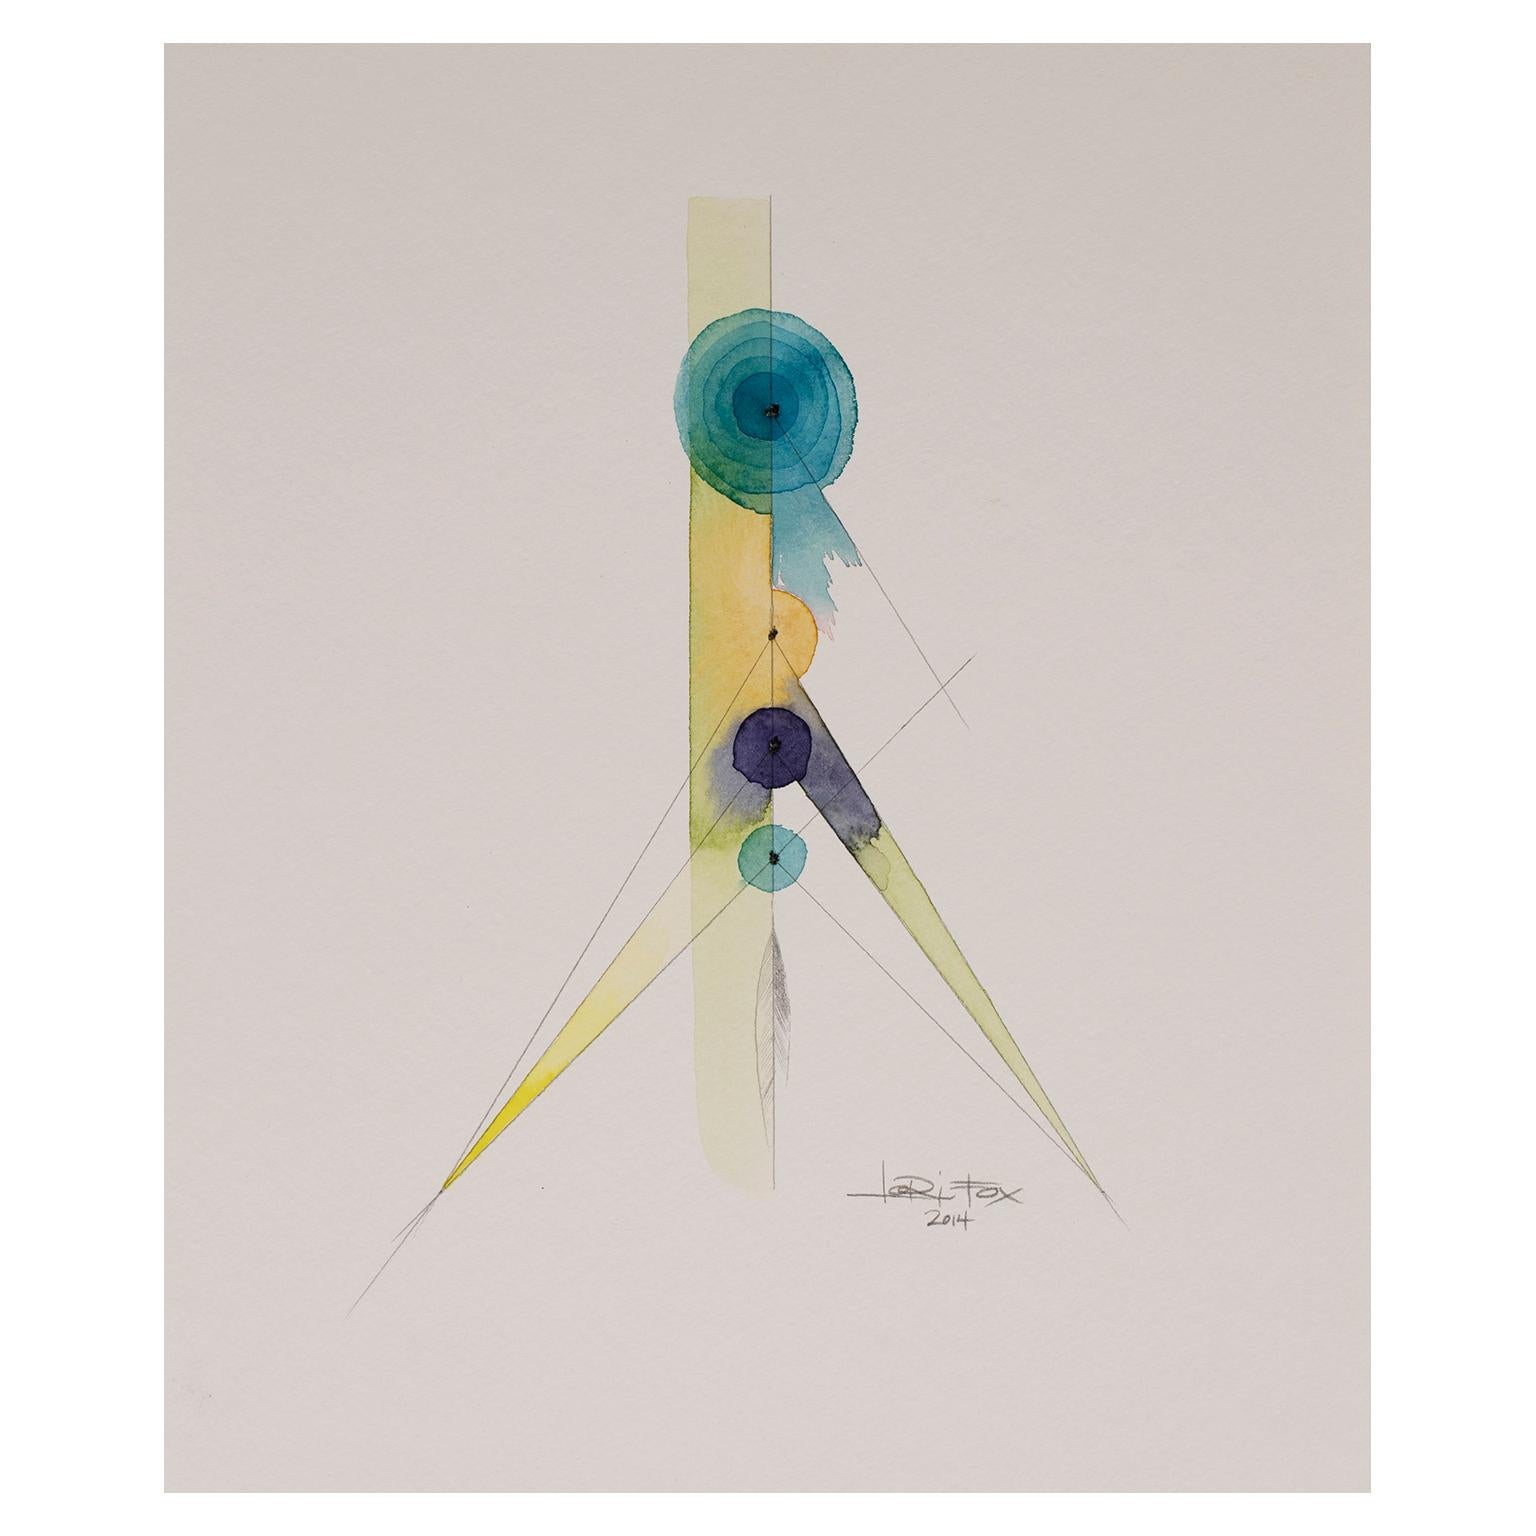 Totem 2.002 by Lori Fox. Blue, yellow abstract watercolor and graphite on paper 1